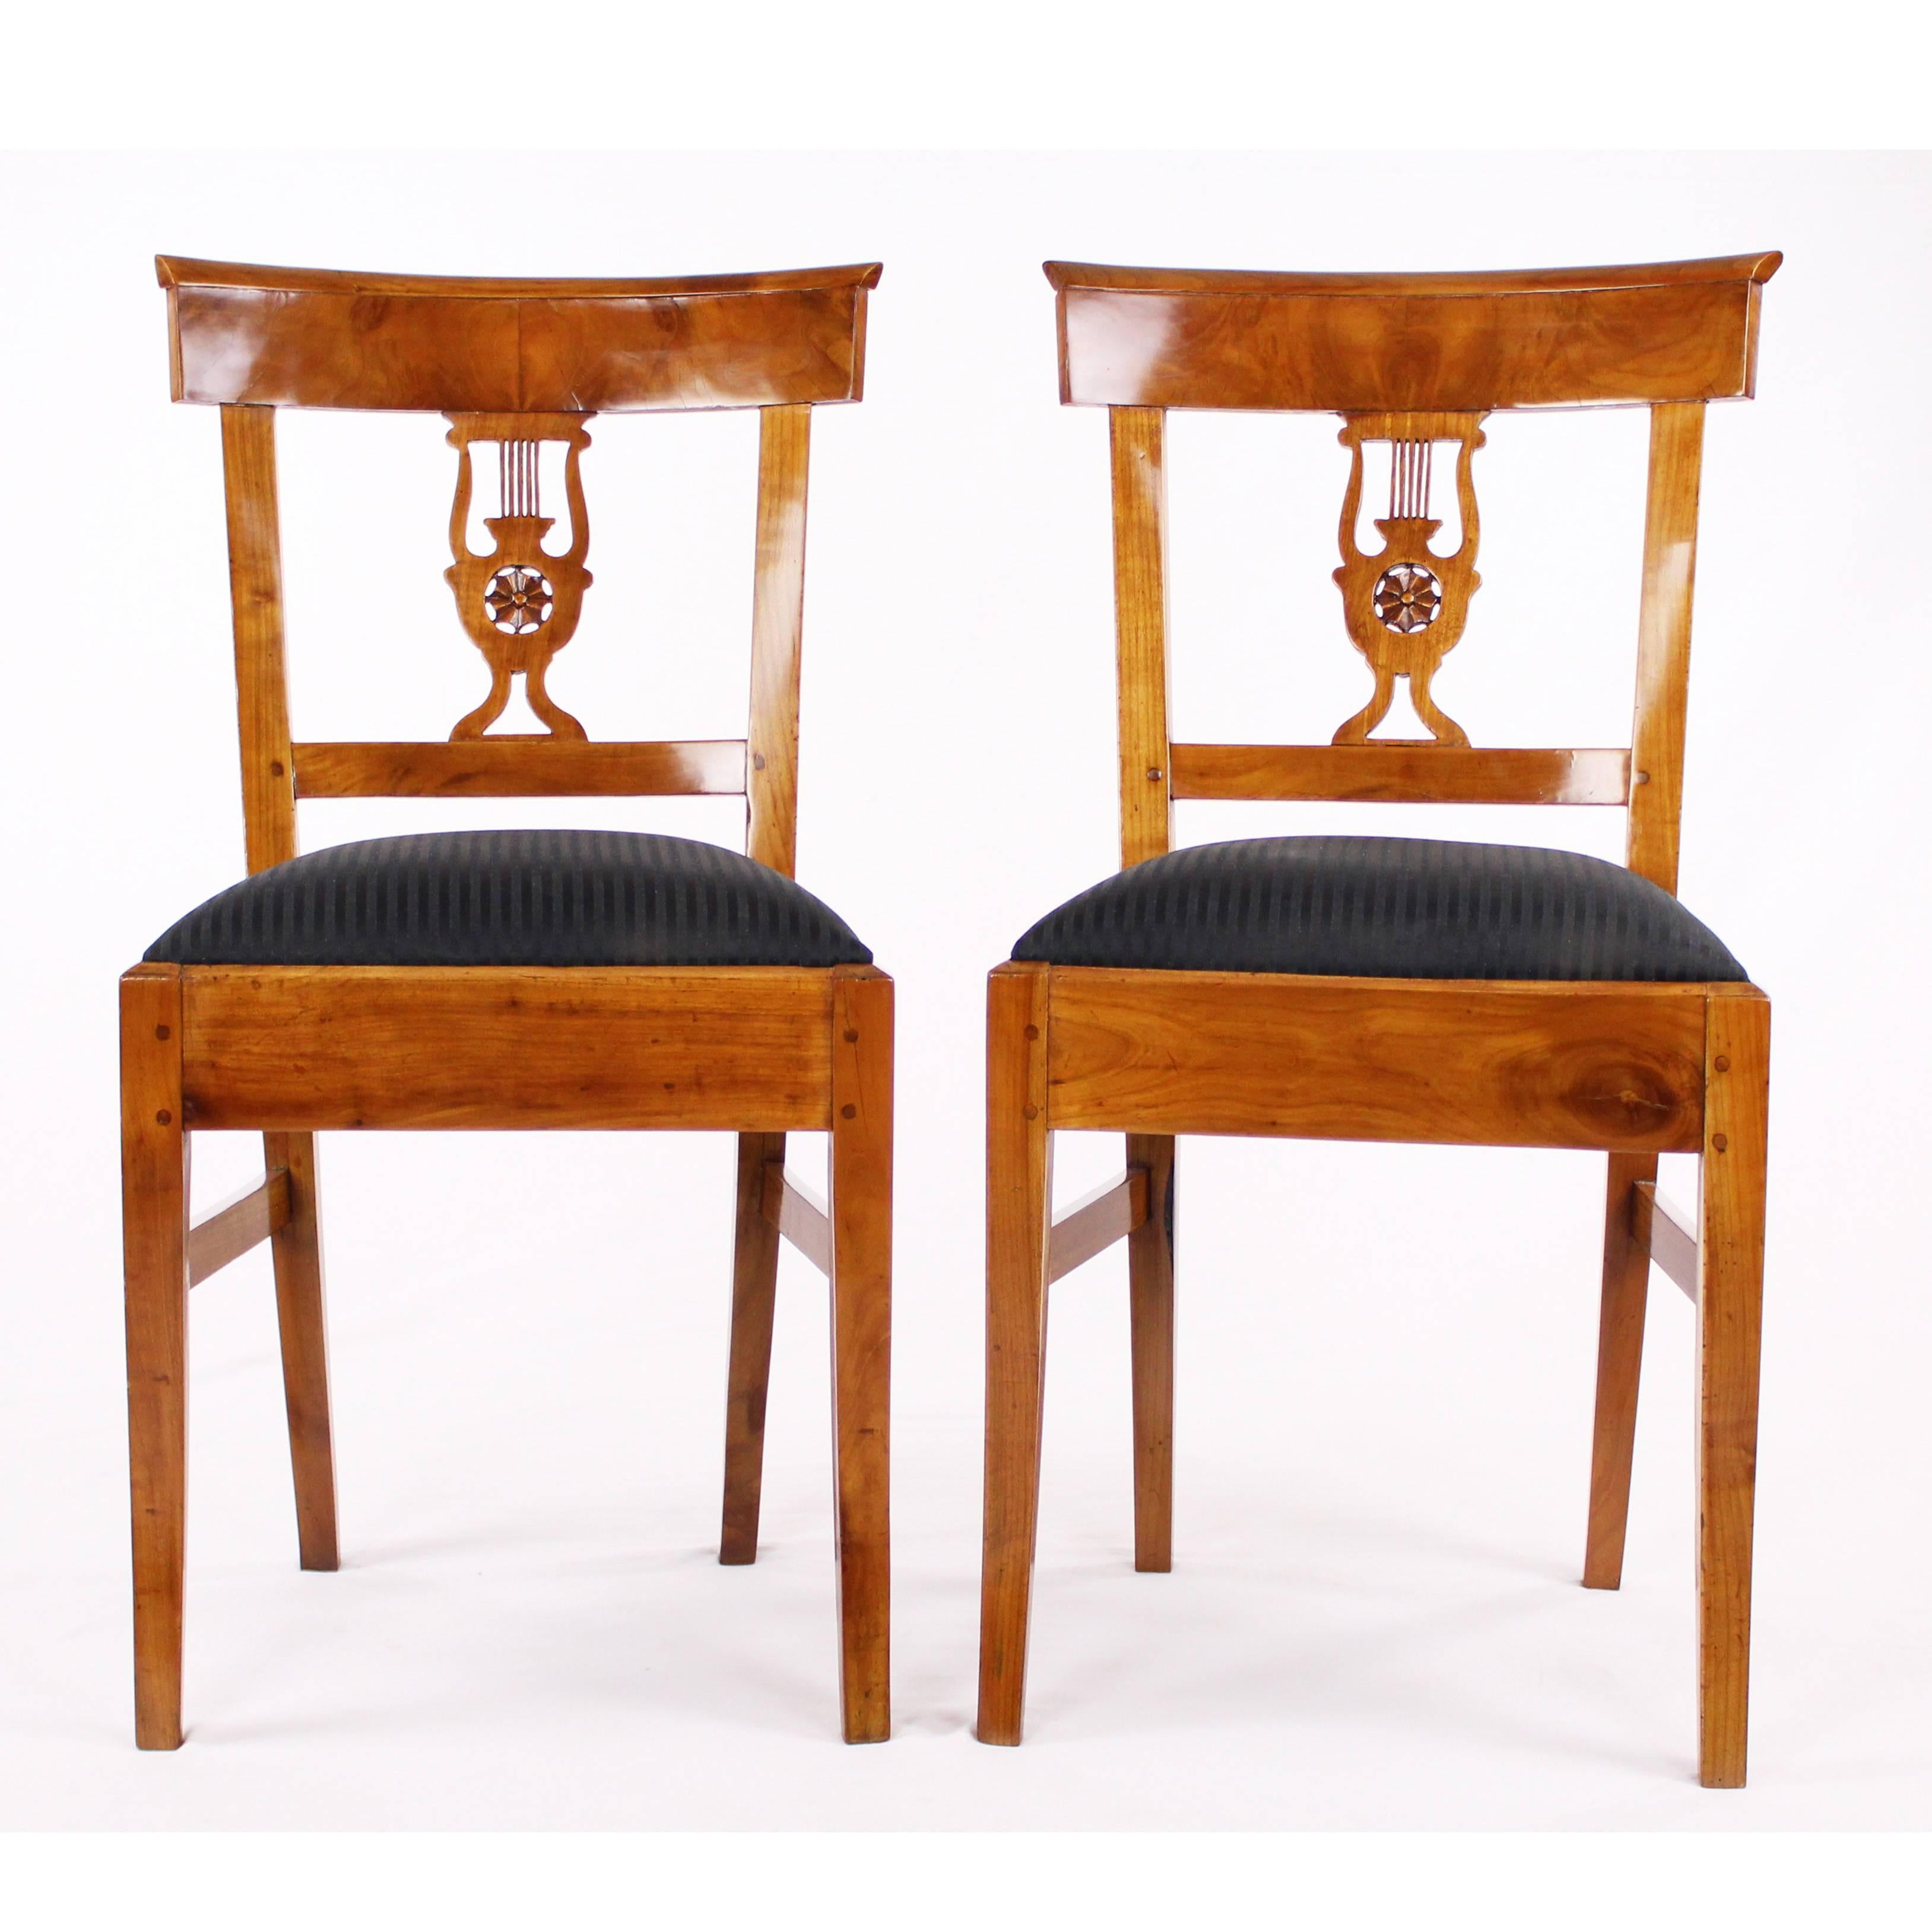 Very rare set of six Biedermeier period chairs, circa 1830
Cherry tree veneered
Back support with Lyra motive
Aanew upholstered and referring
Restored residential-ready state
French shellac hand polish
Height 89.5 cm, width 49 cm, depth 40 cm,